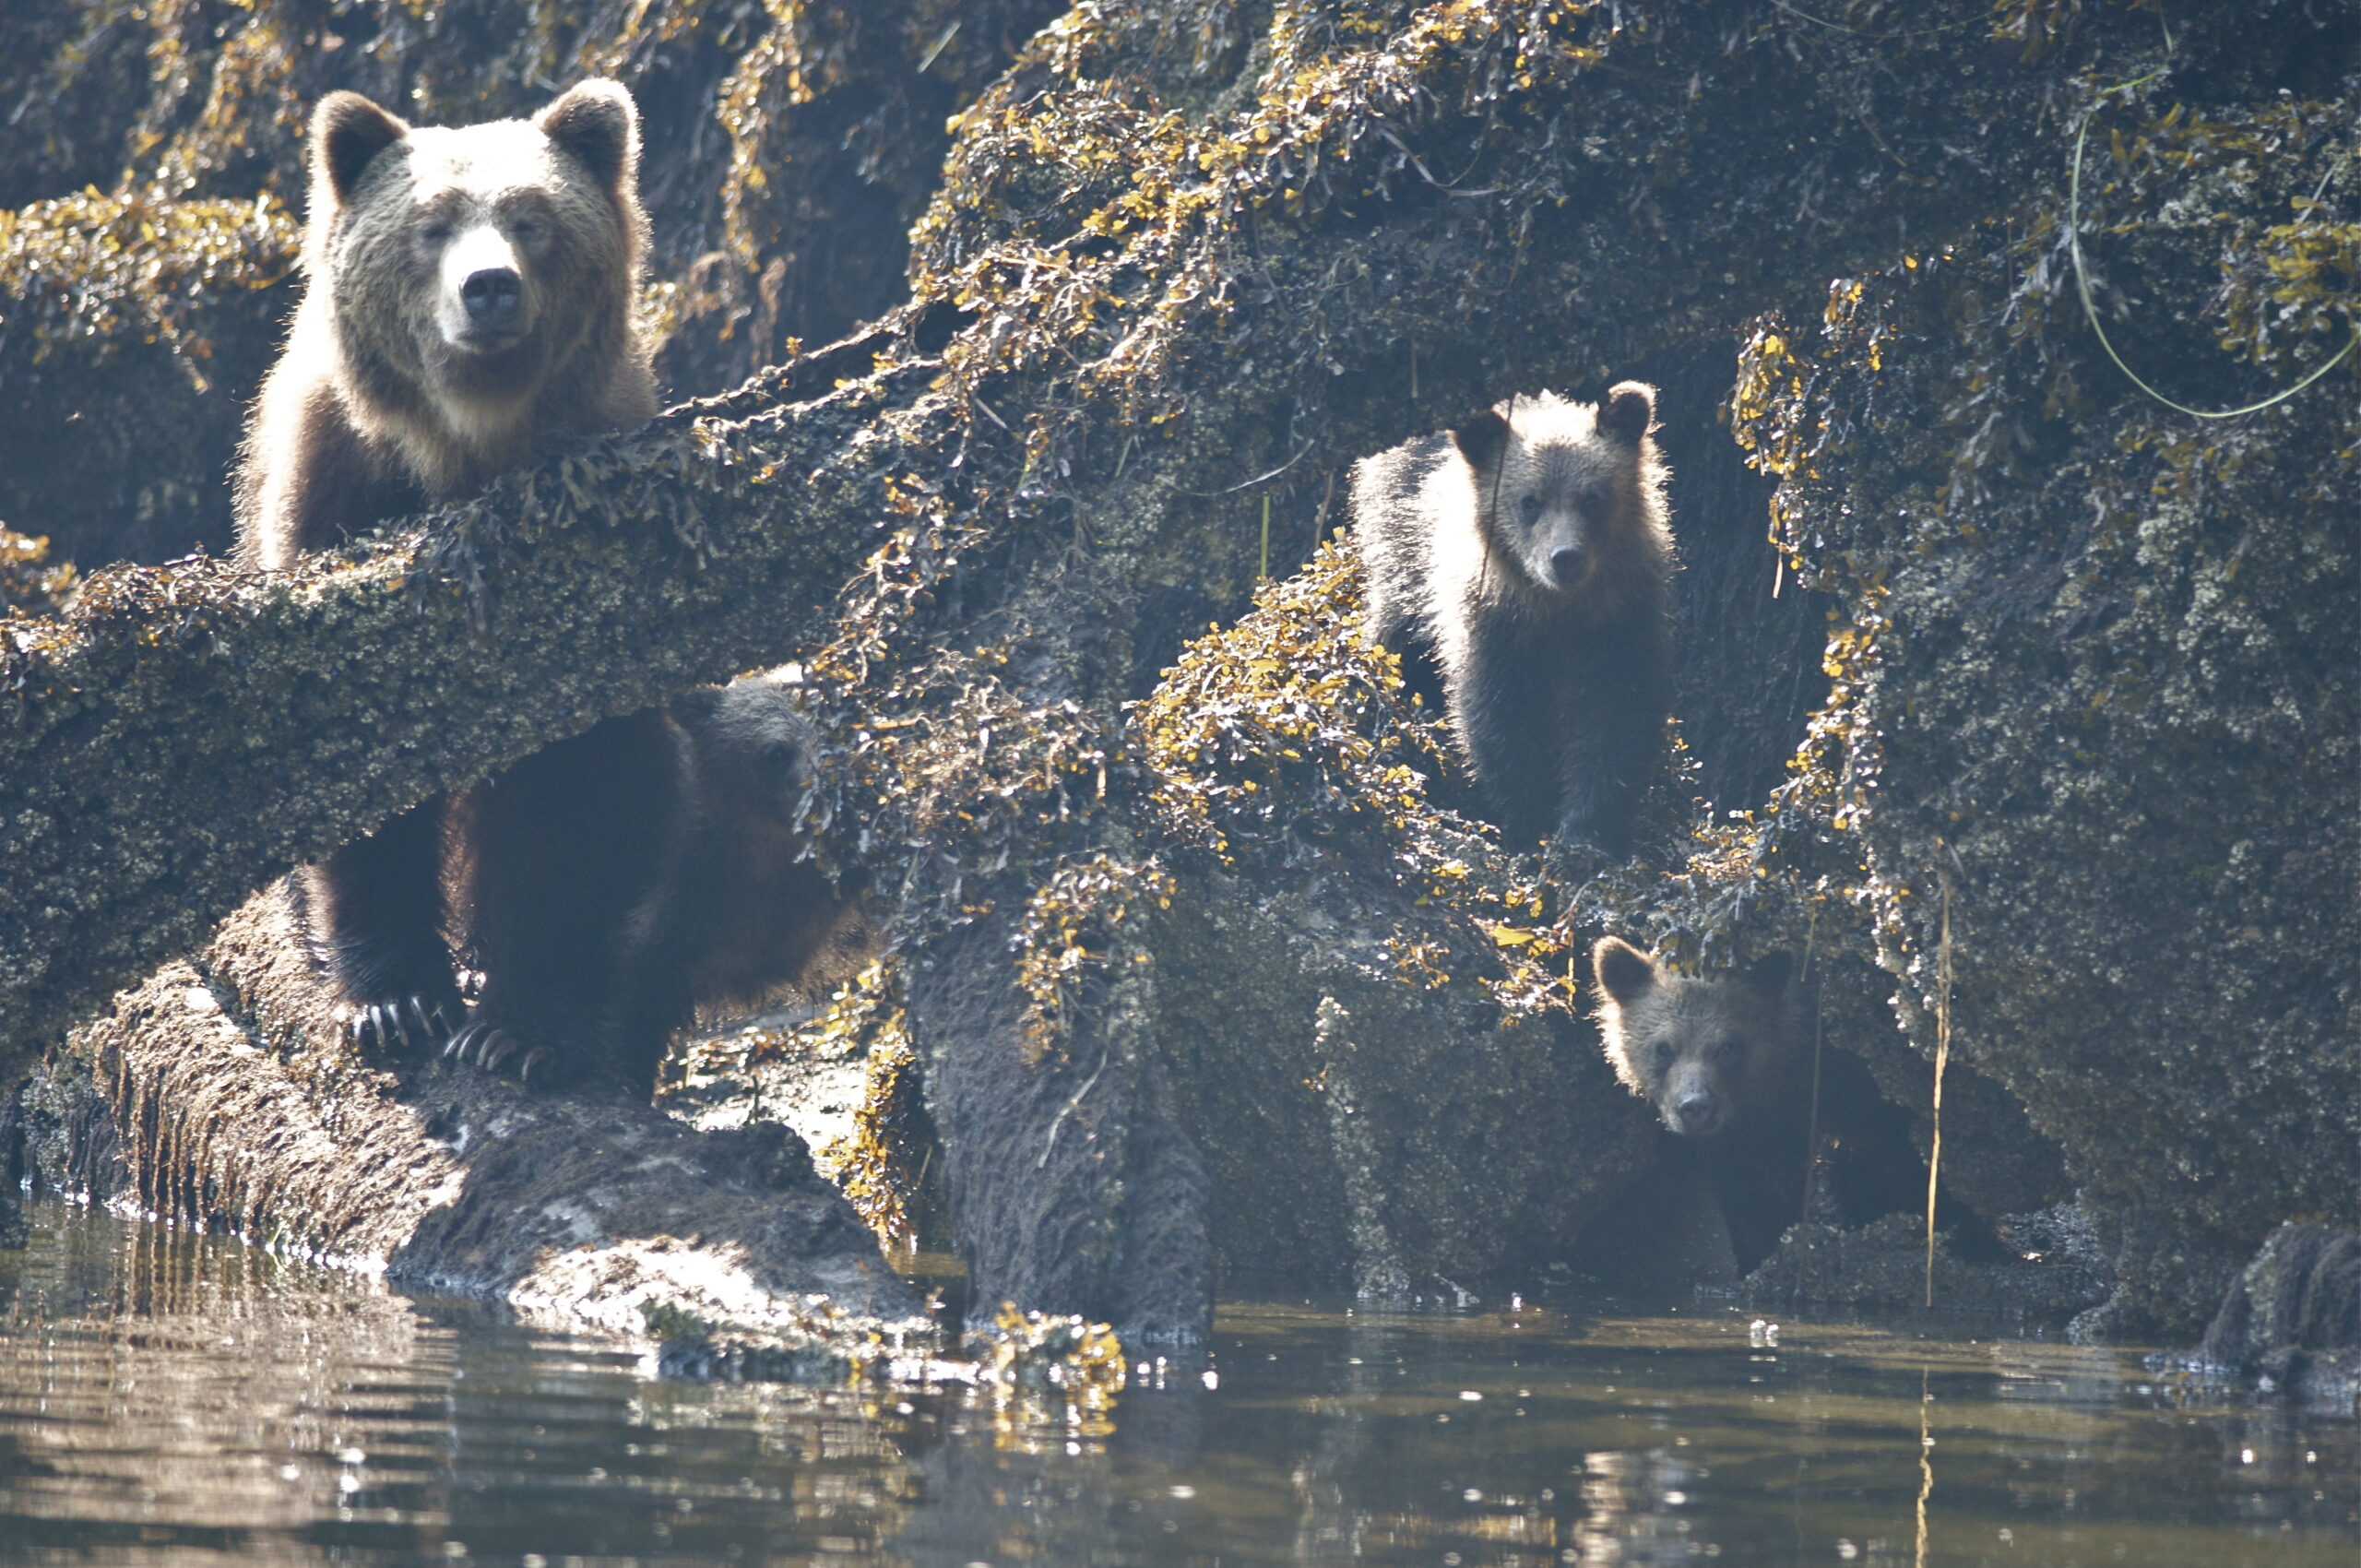 A group of bears in the water.